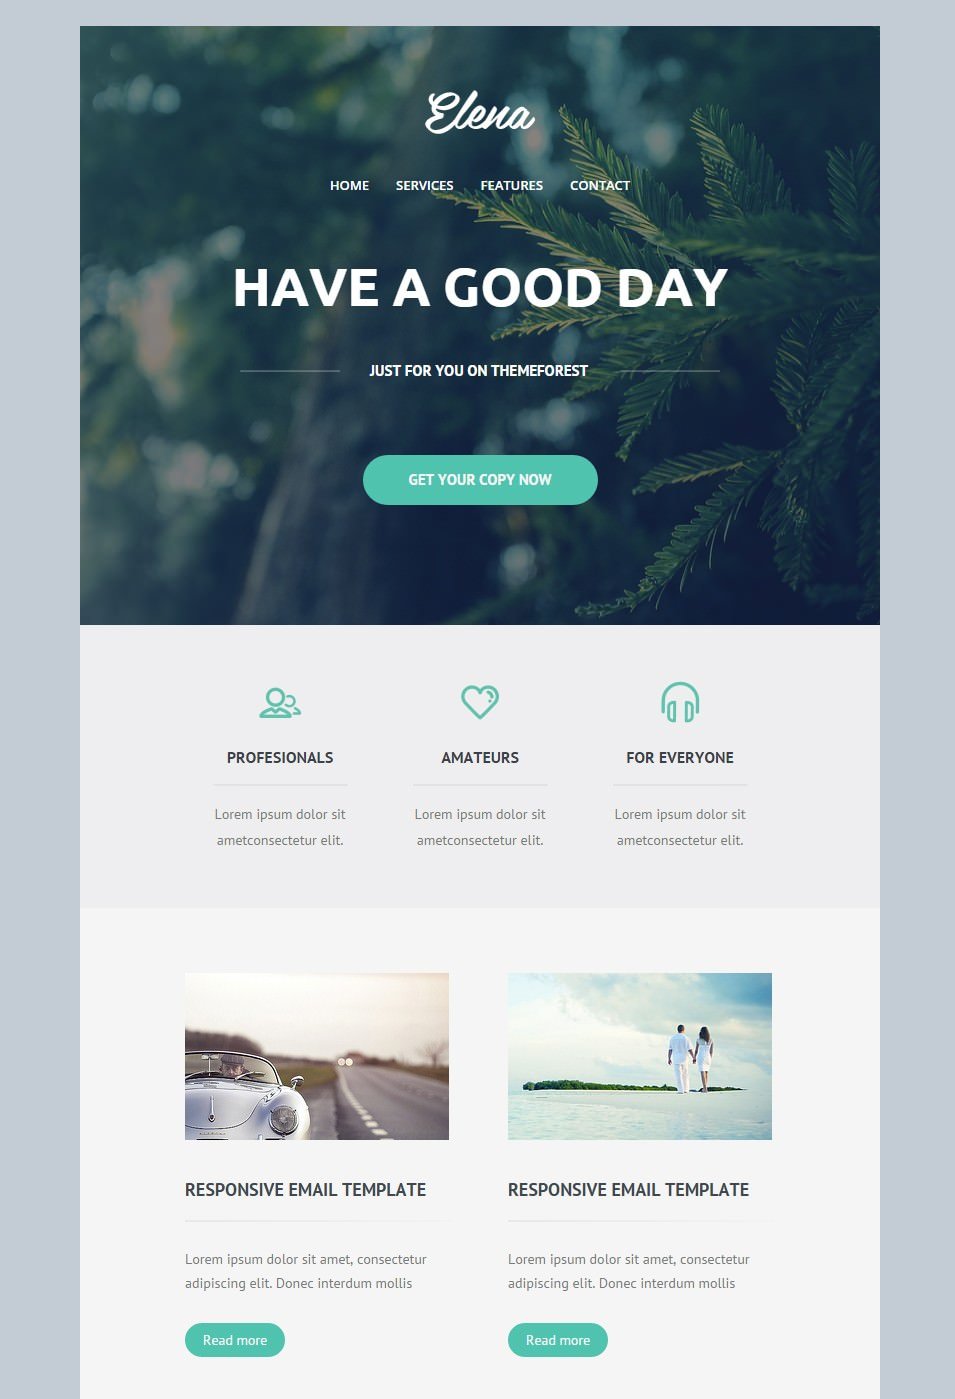 elena responsive email template